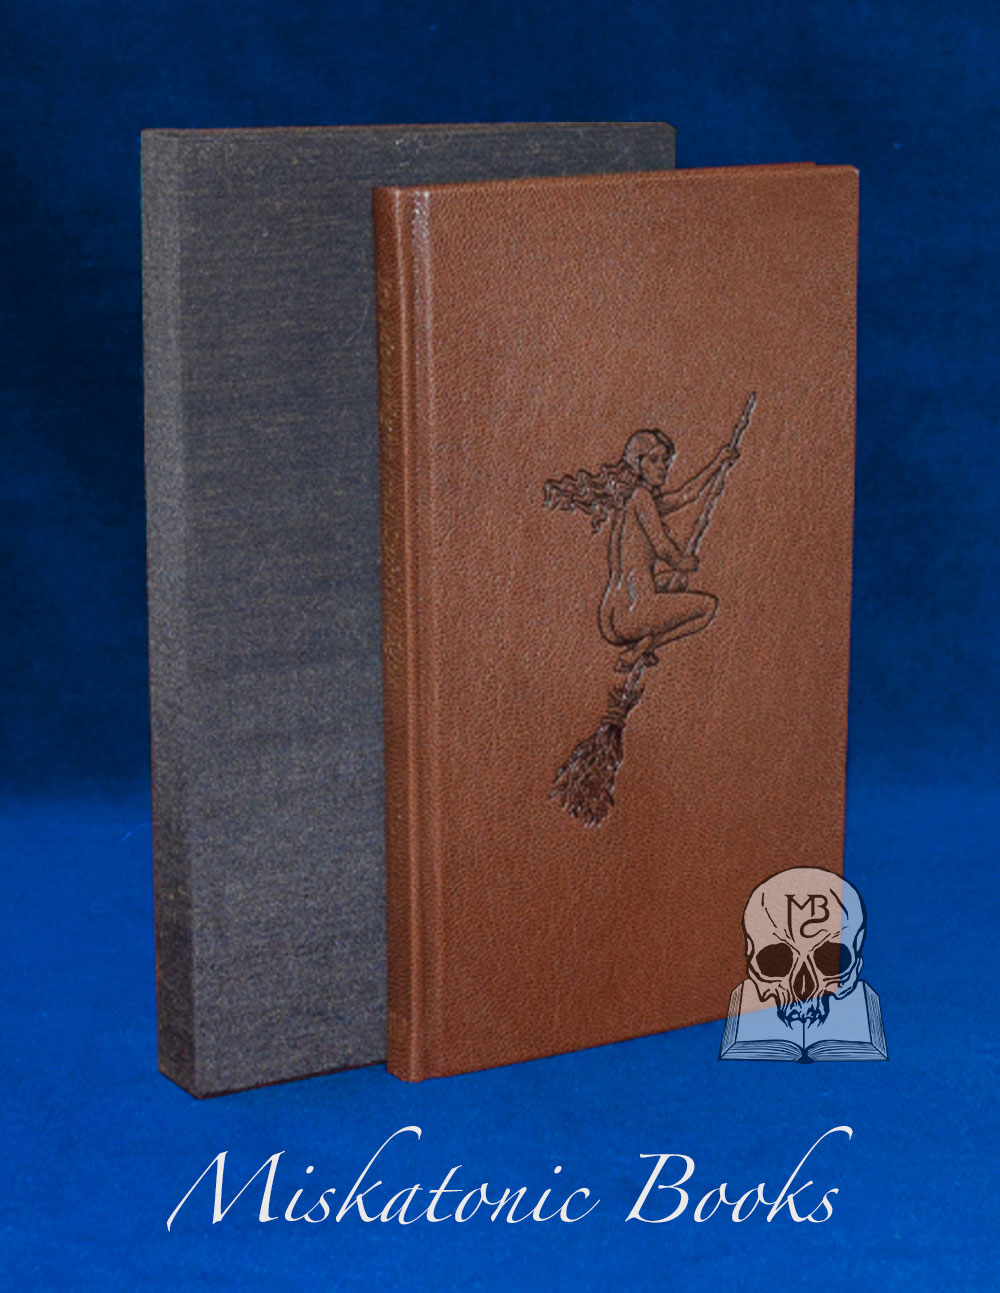 BY MOONLIGHT AND SPIRIT FLIGHT: The Praxis of the Otherworldly Journey to the Witches' Sabbath by Michael Howard - Deluxe Limited Edition Bound in Umber Goat with Marbled and Custom Slipcase